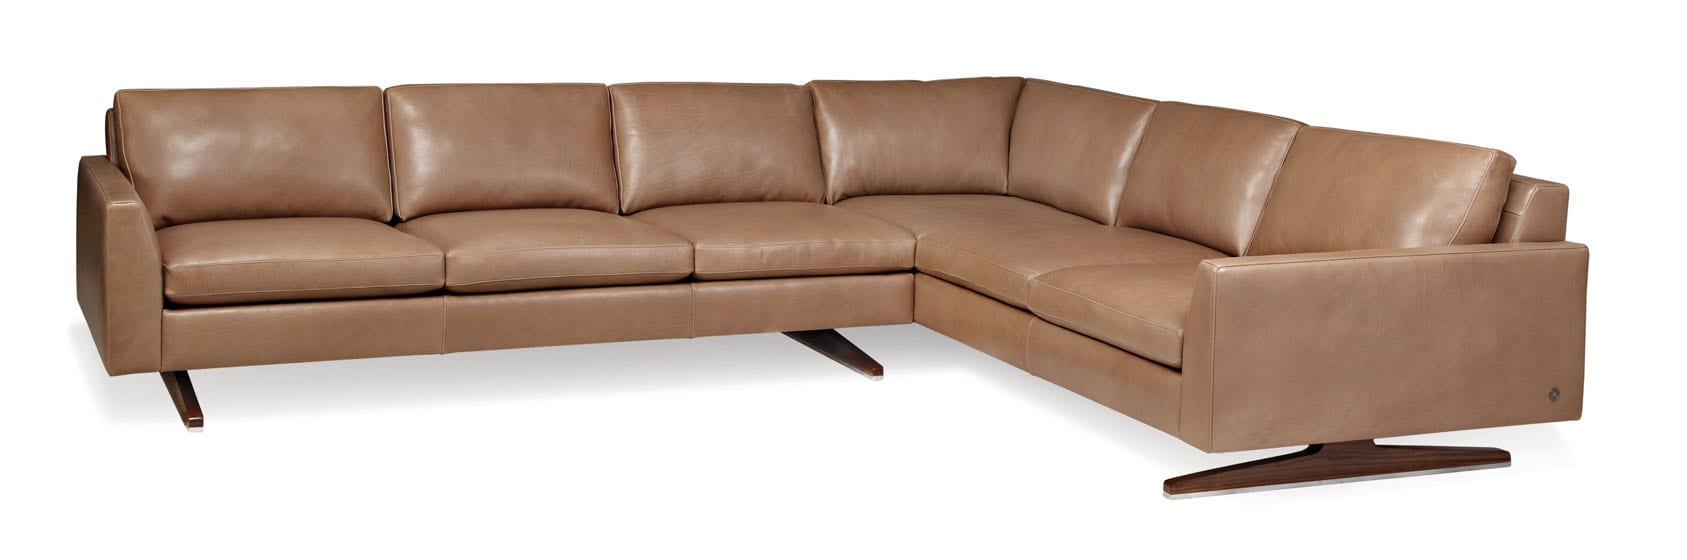 American Leather Flynn Sectional Sofa, American Leather Sectionals